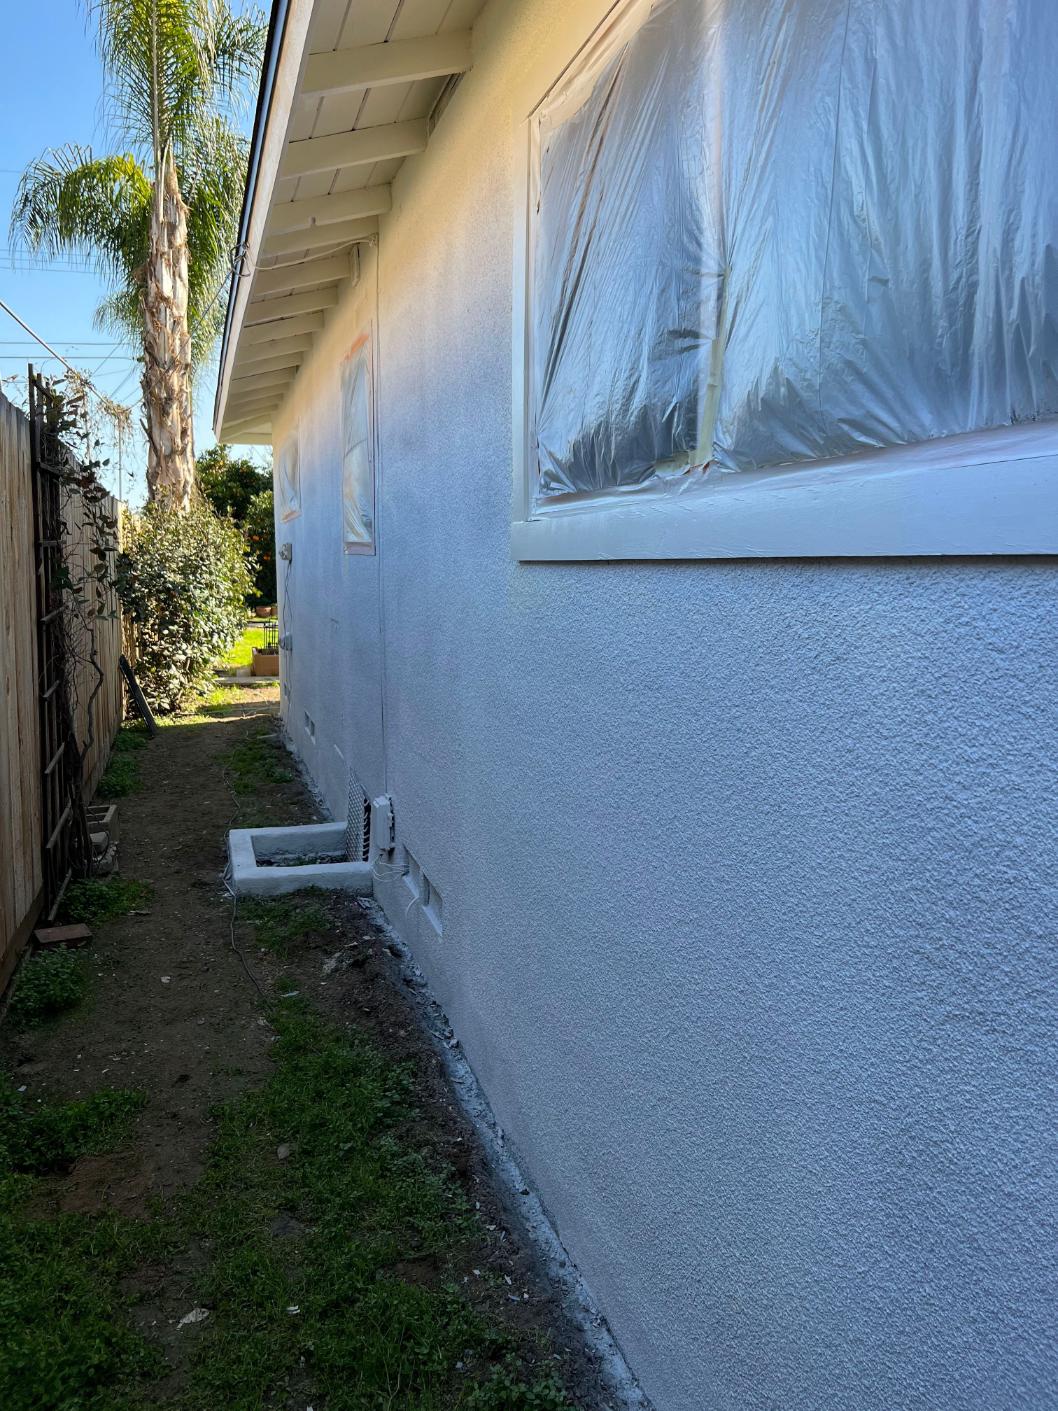 Coolwall Exterior Coating in Bakersfield, CA